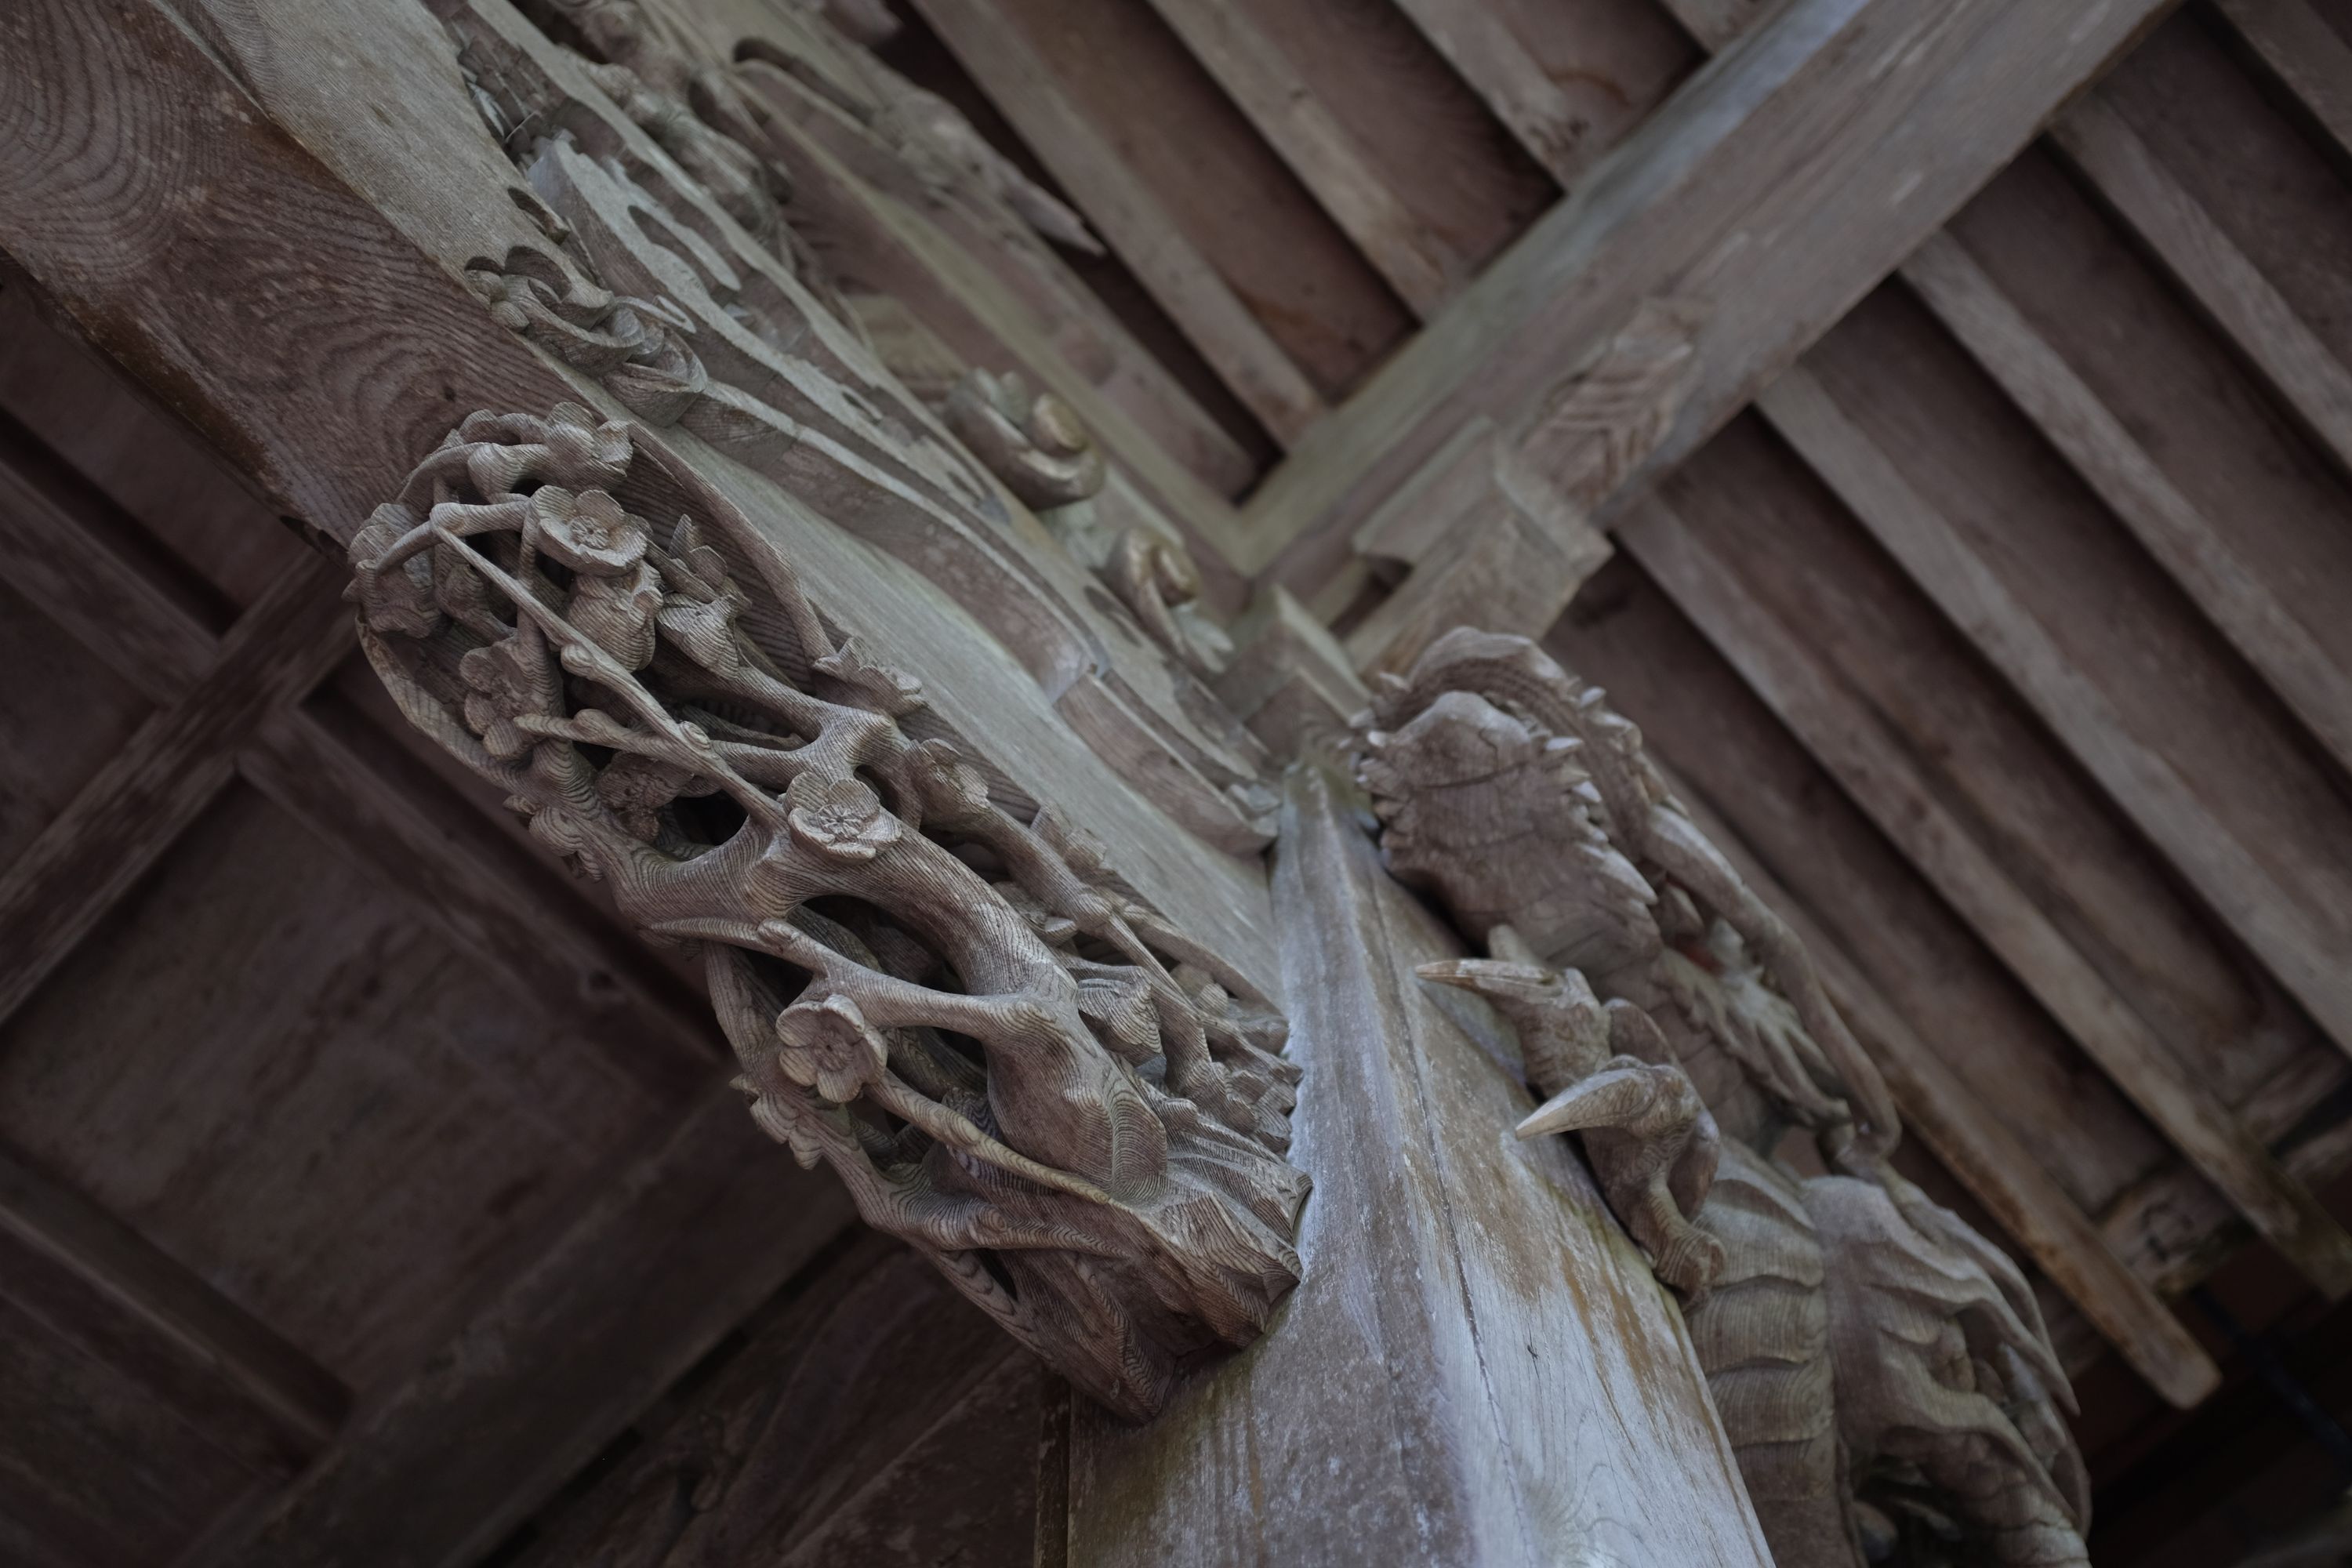 Carved wooden flowers and dragons on a column.